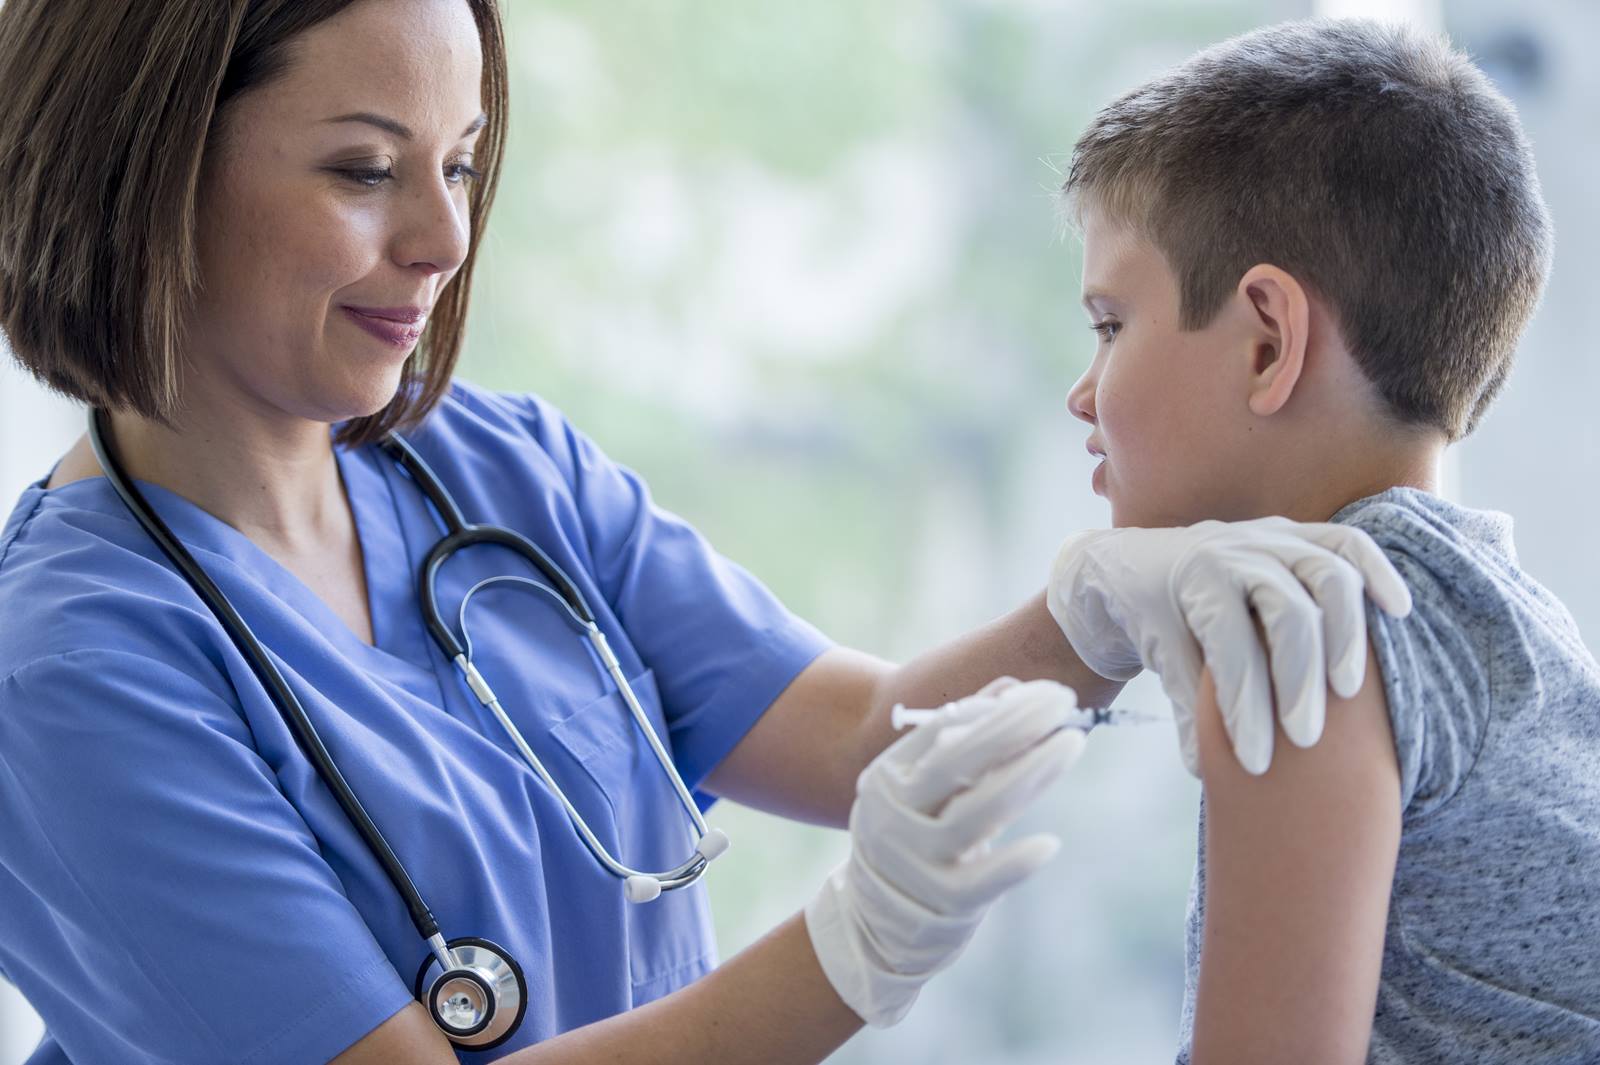 Measles and Mumps: Here's What You Need to Know